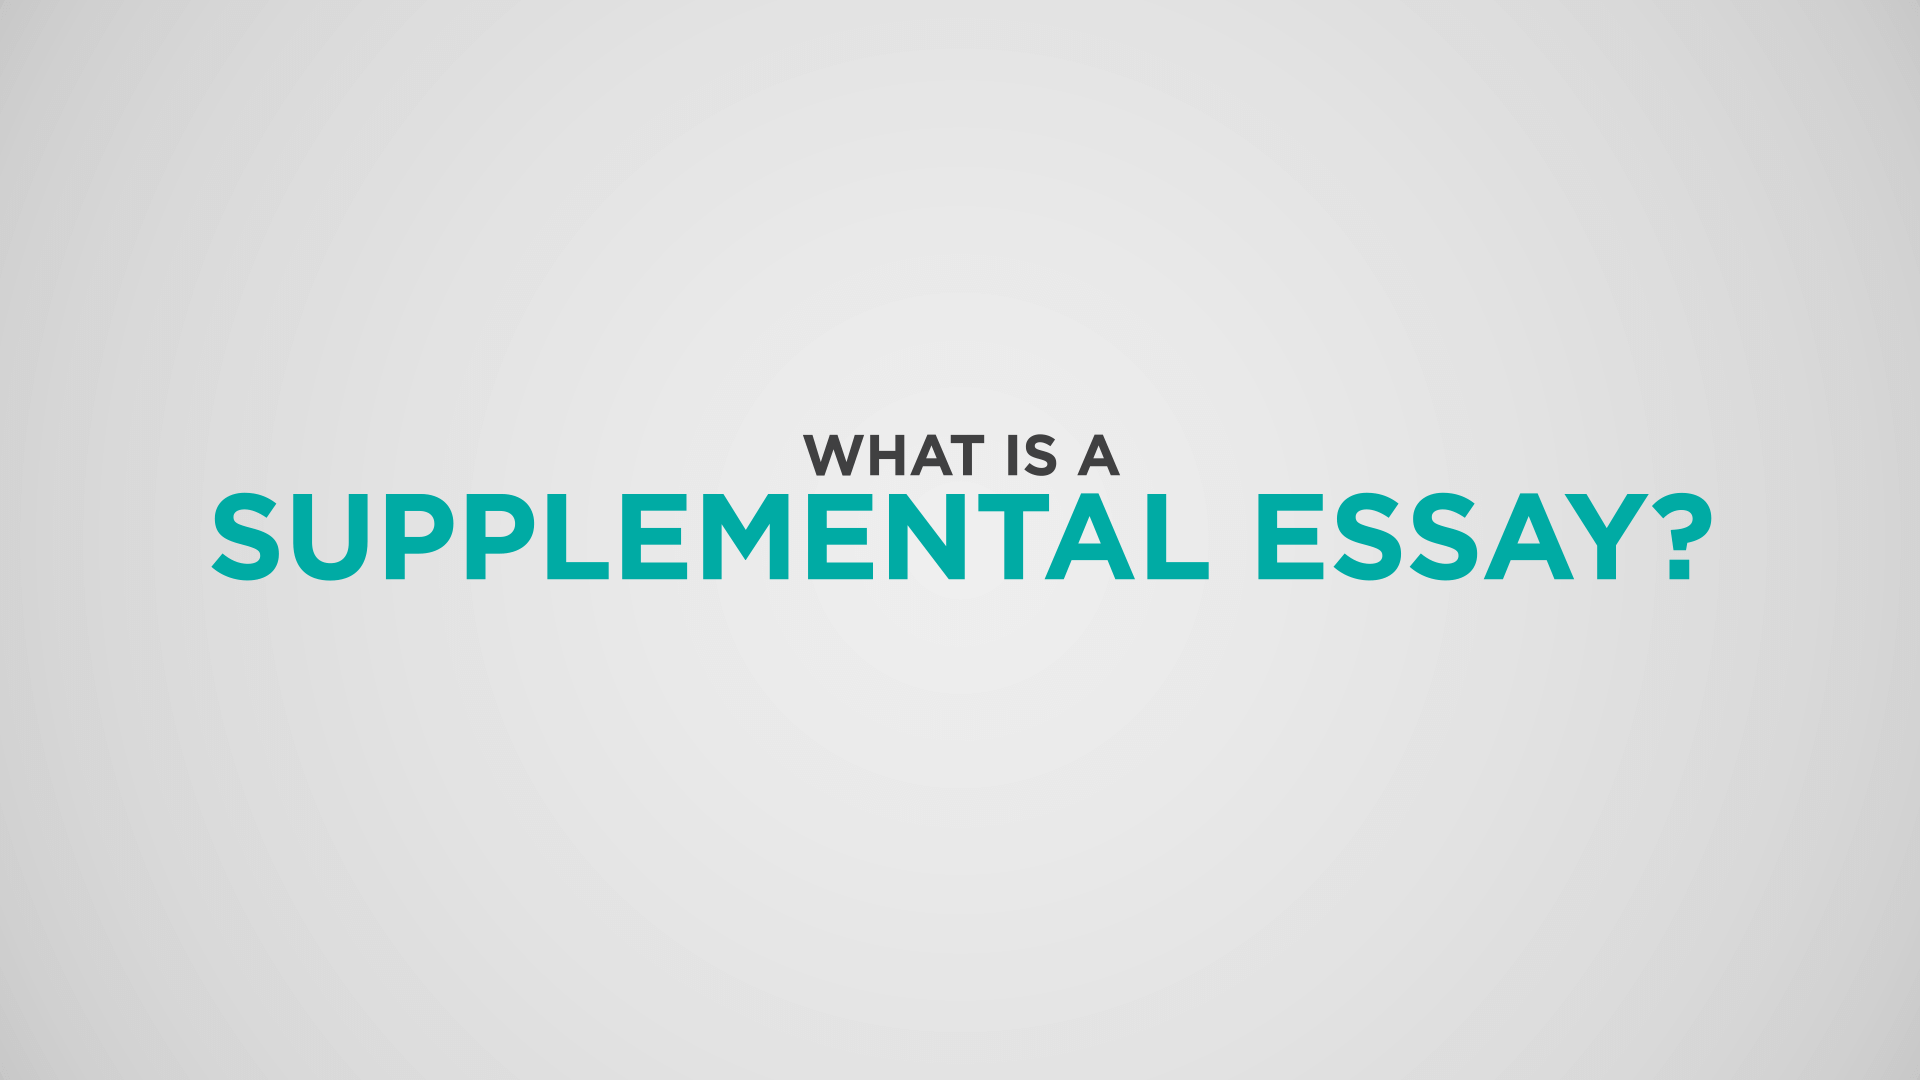 What is a Supplemental Essay?